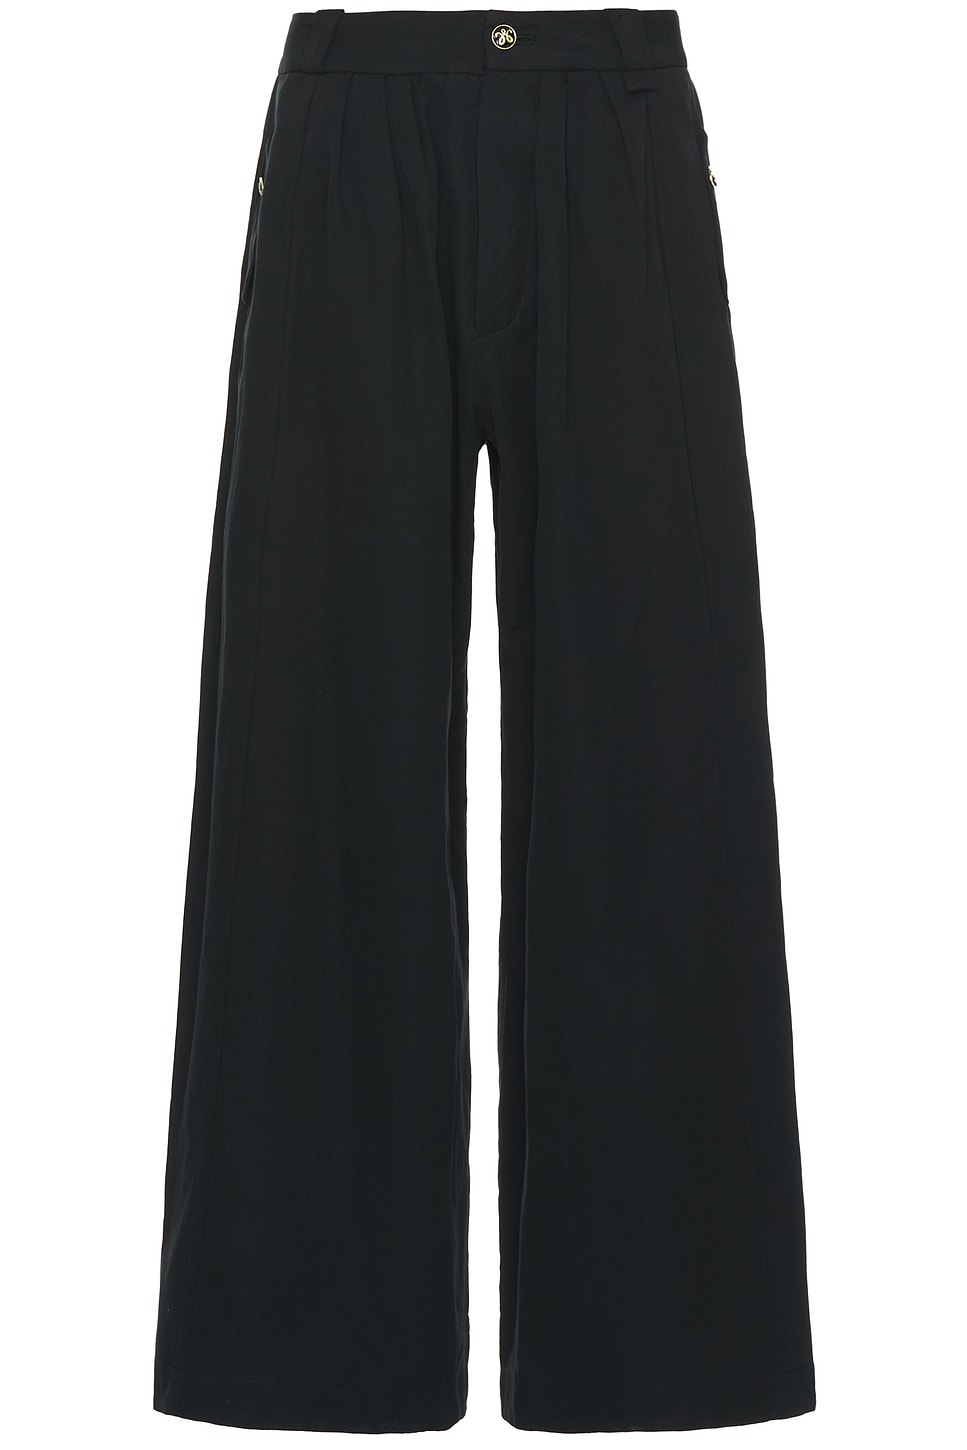 Image 1 of Willy Chavarria Mudflaps Trousers in Black